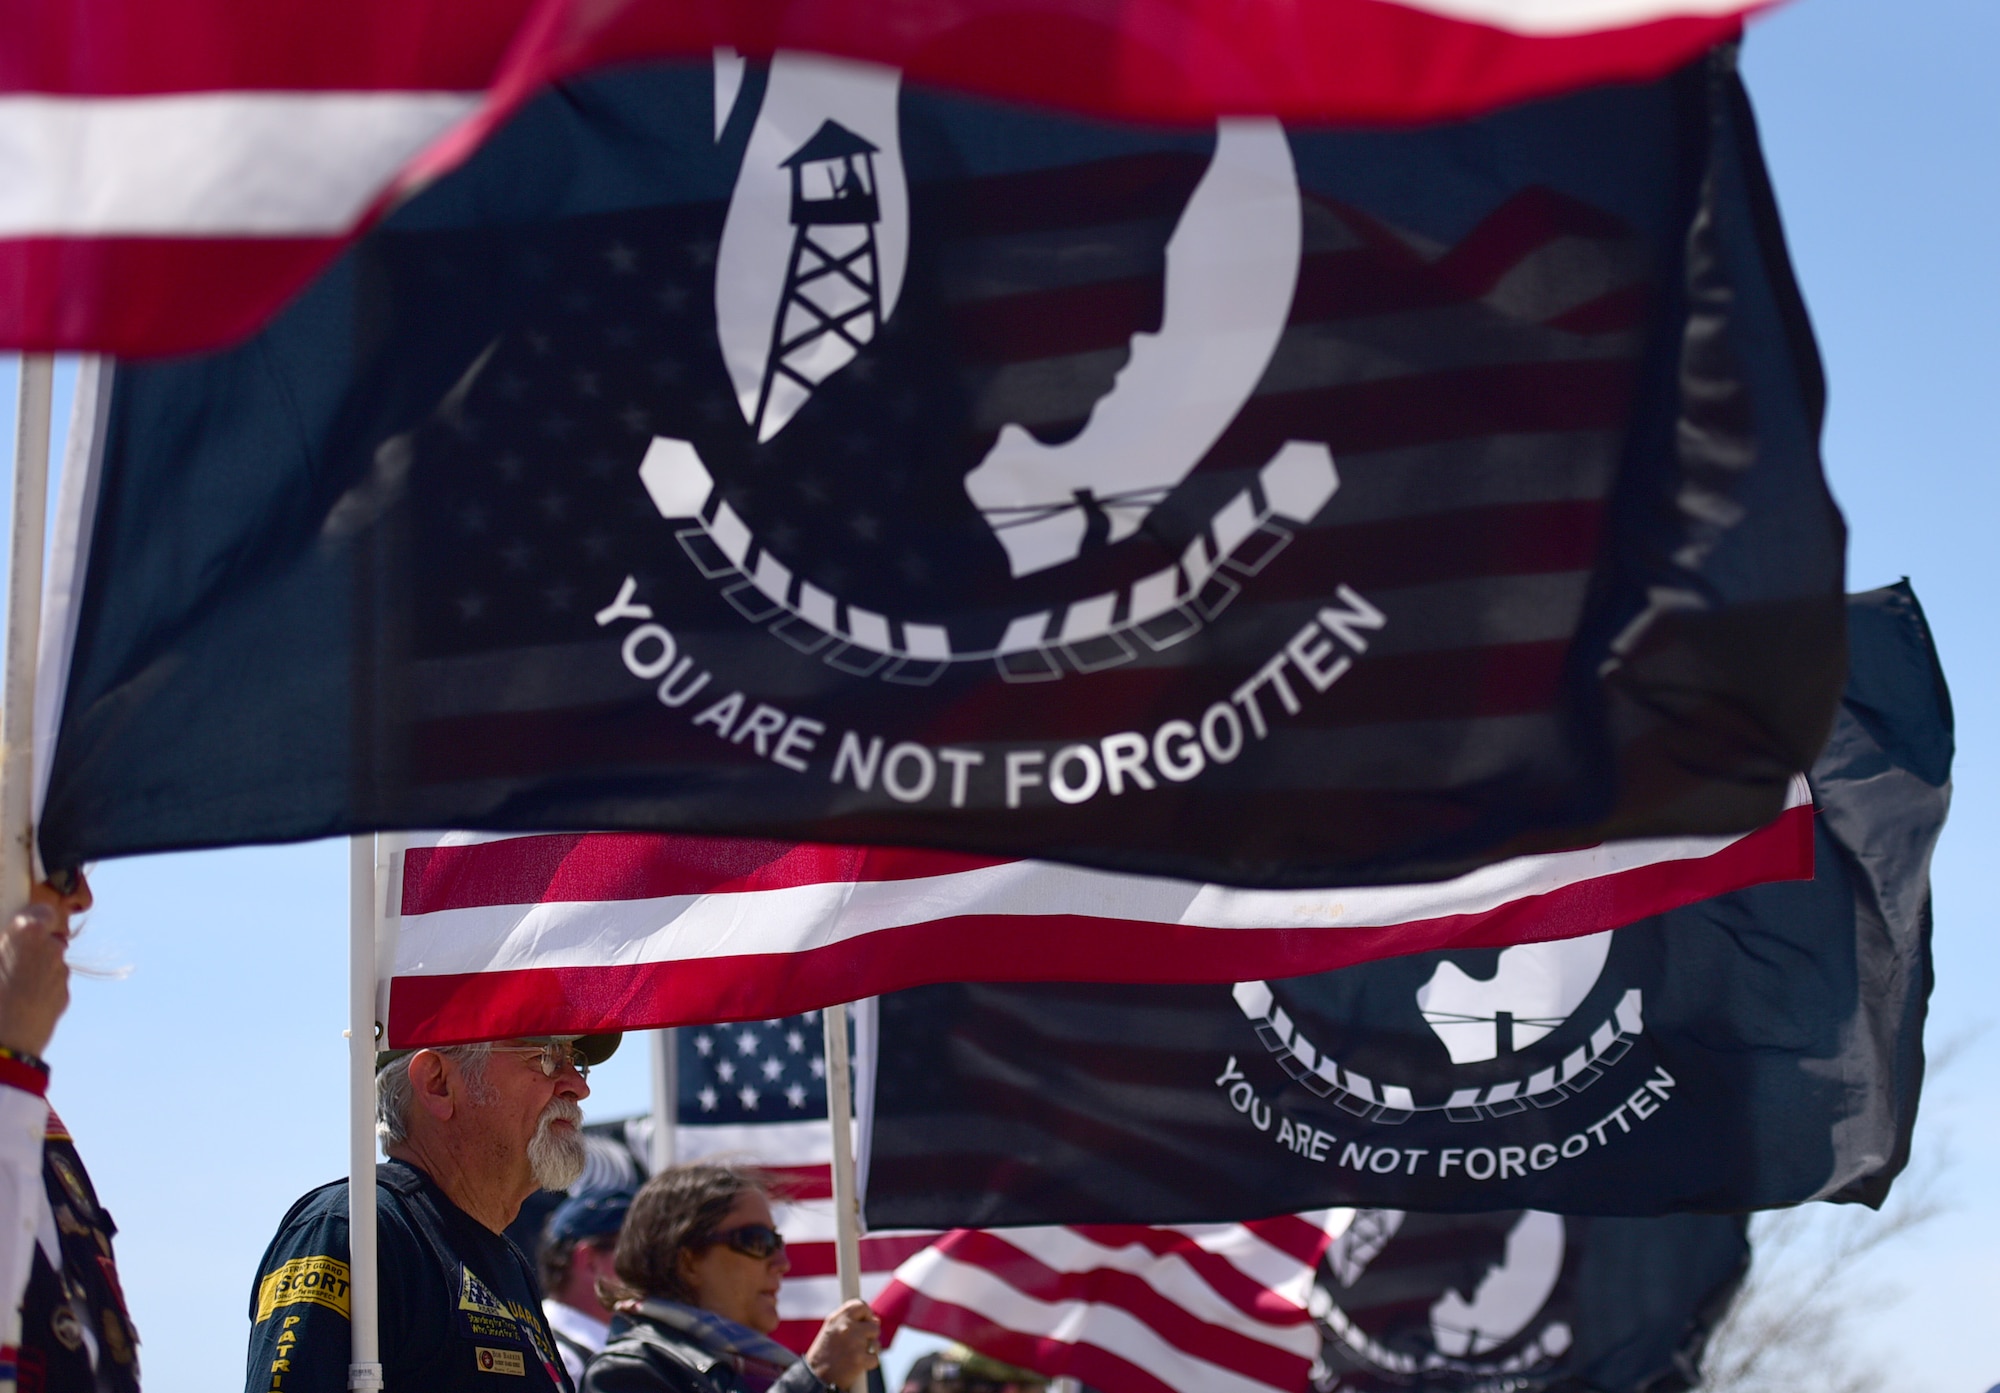 Patriot Guard Riders of North Carolina attend Col. Edgar Davis’ funeral ceremony April 6, 2018, in Goldsboro, North Carolina. Davis was shot down during a night photo-reconnaissance mission over Laos during the Vietnam War. After initial rescue efforts were unsuccessful, he was assumed dead and his remains stayed missing for 50 years. (U.S. Air Force photo by Senior Airman Christian Clausen)